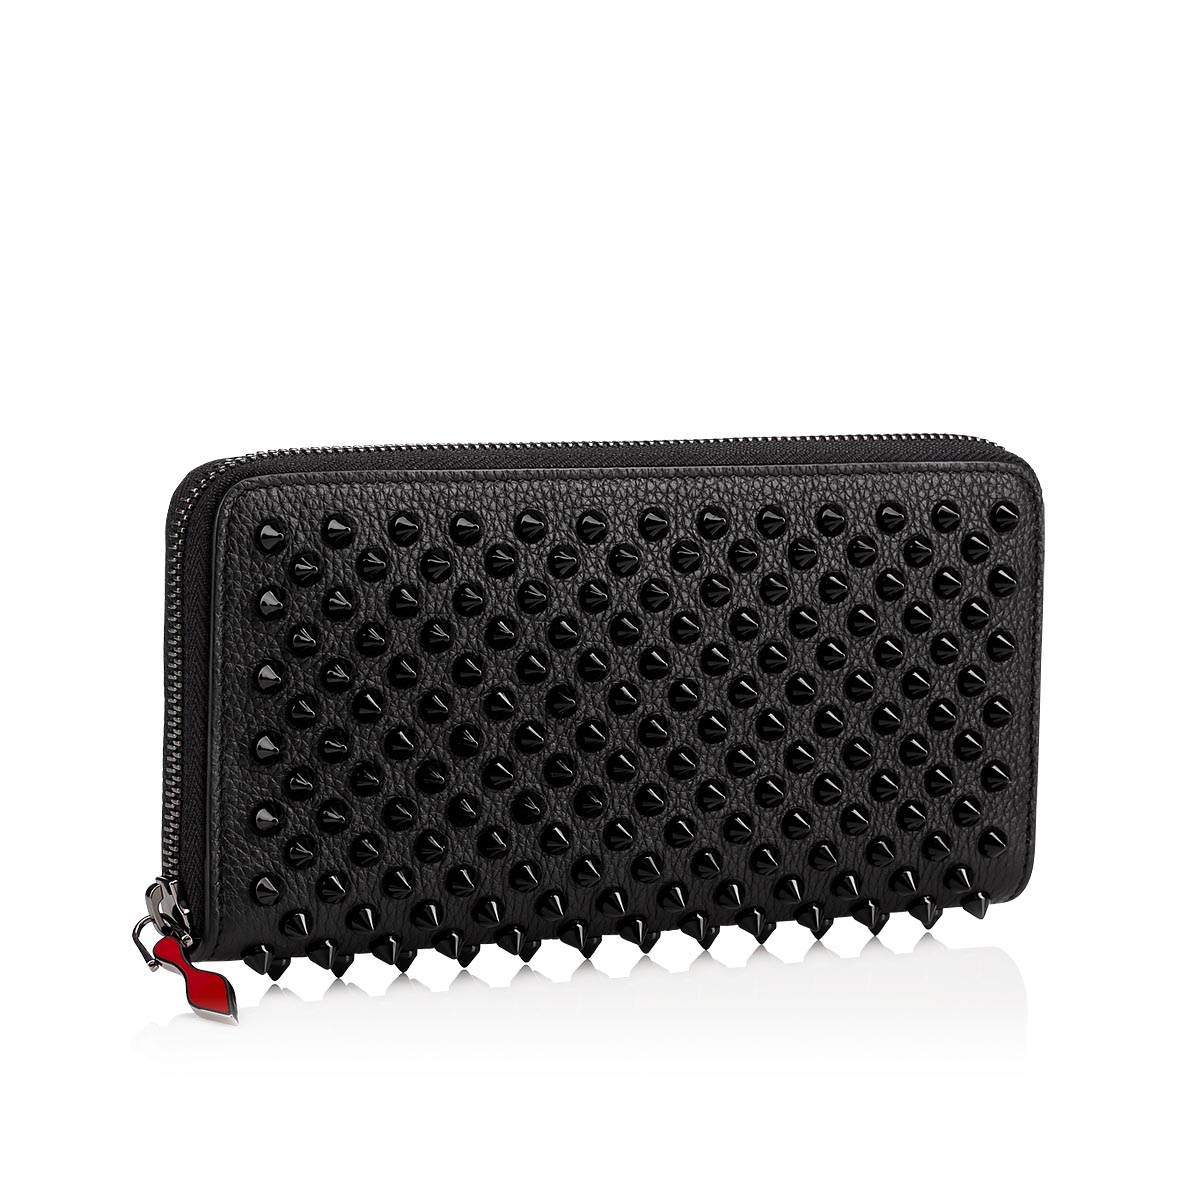 Auth Christian Louboutin Panettone Black Leather Spikes Round Zip Wallet  #9456